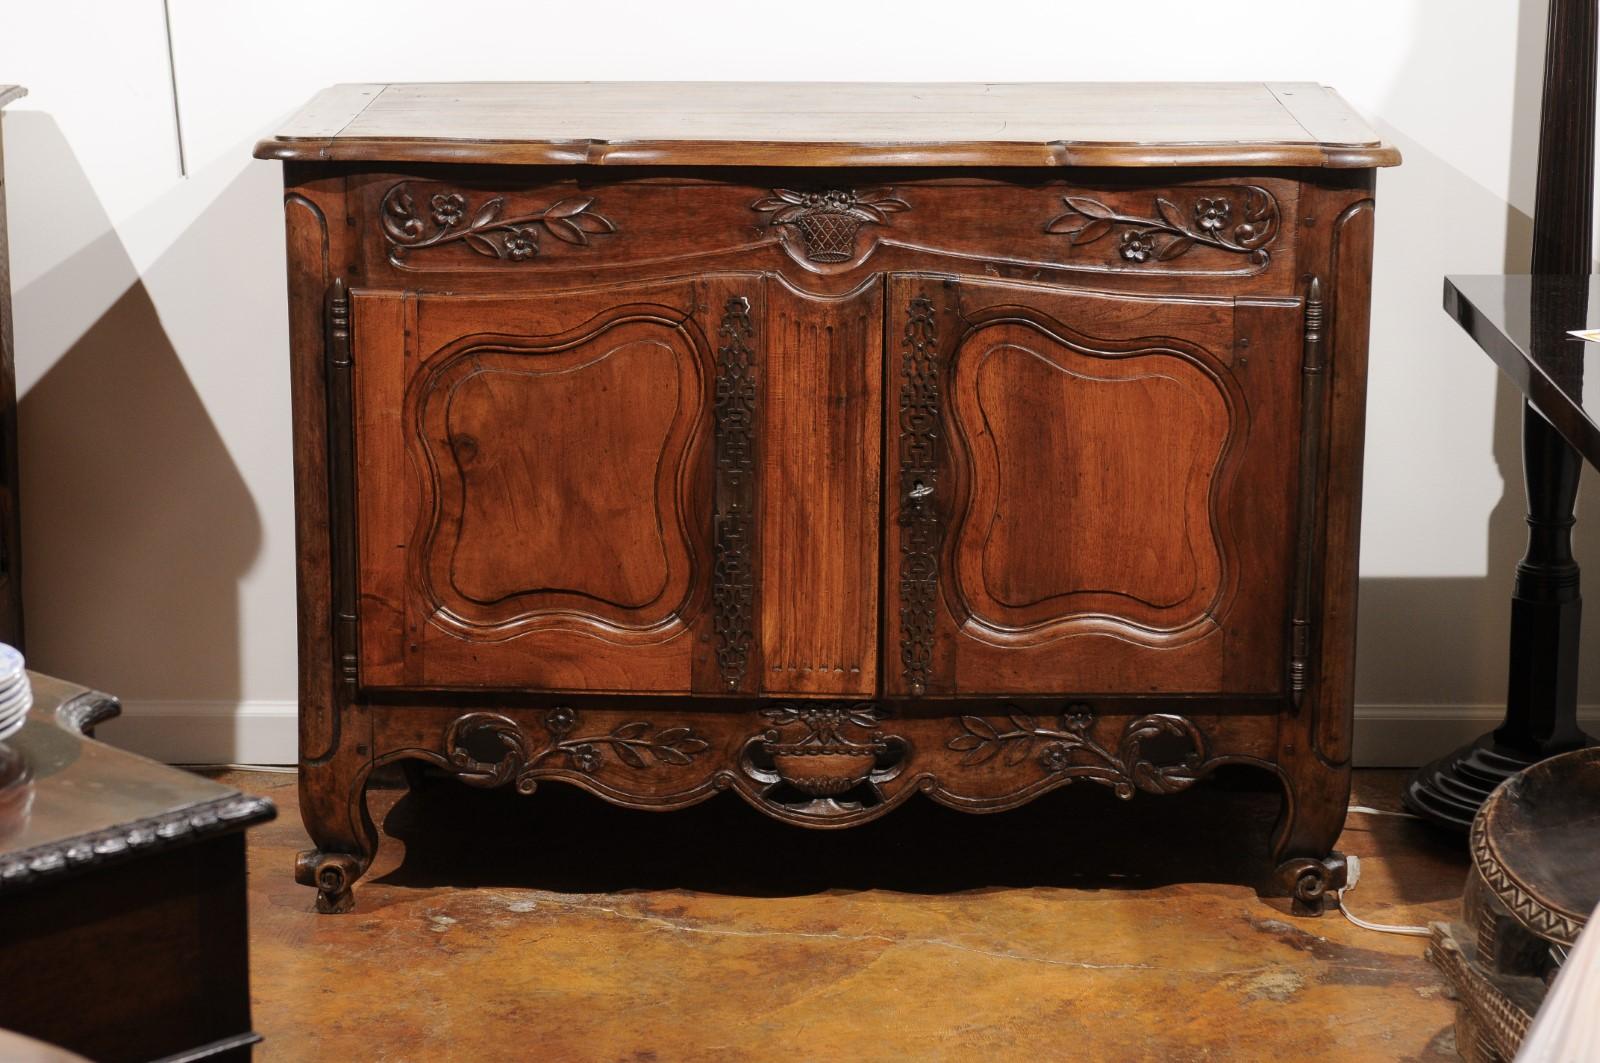 A French Louis XV style hand-carved walnut buffet from the early 19th century with floral décor, molded doors and pierced skirt. Born in the early years of the 19th century at a time when France was transitioning from the Consulat to Napoleon's